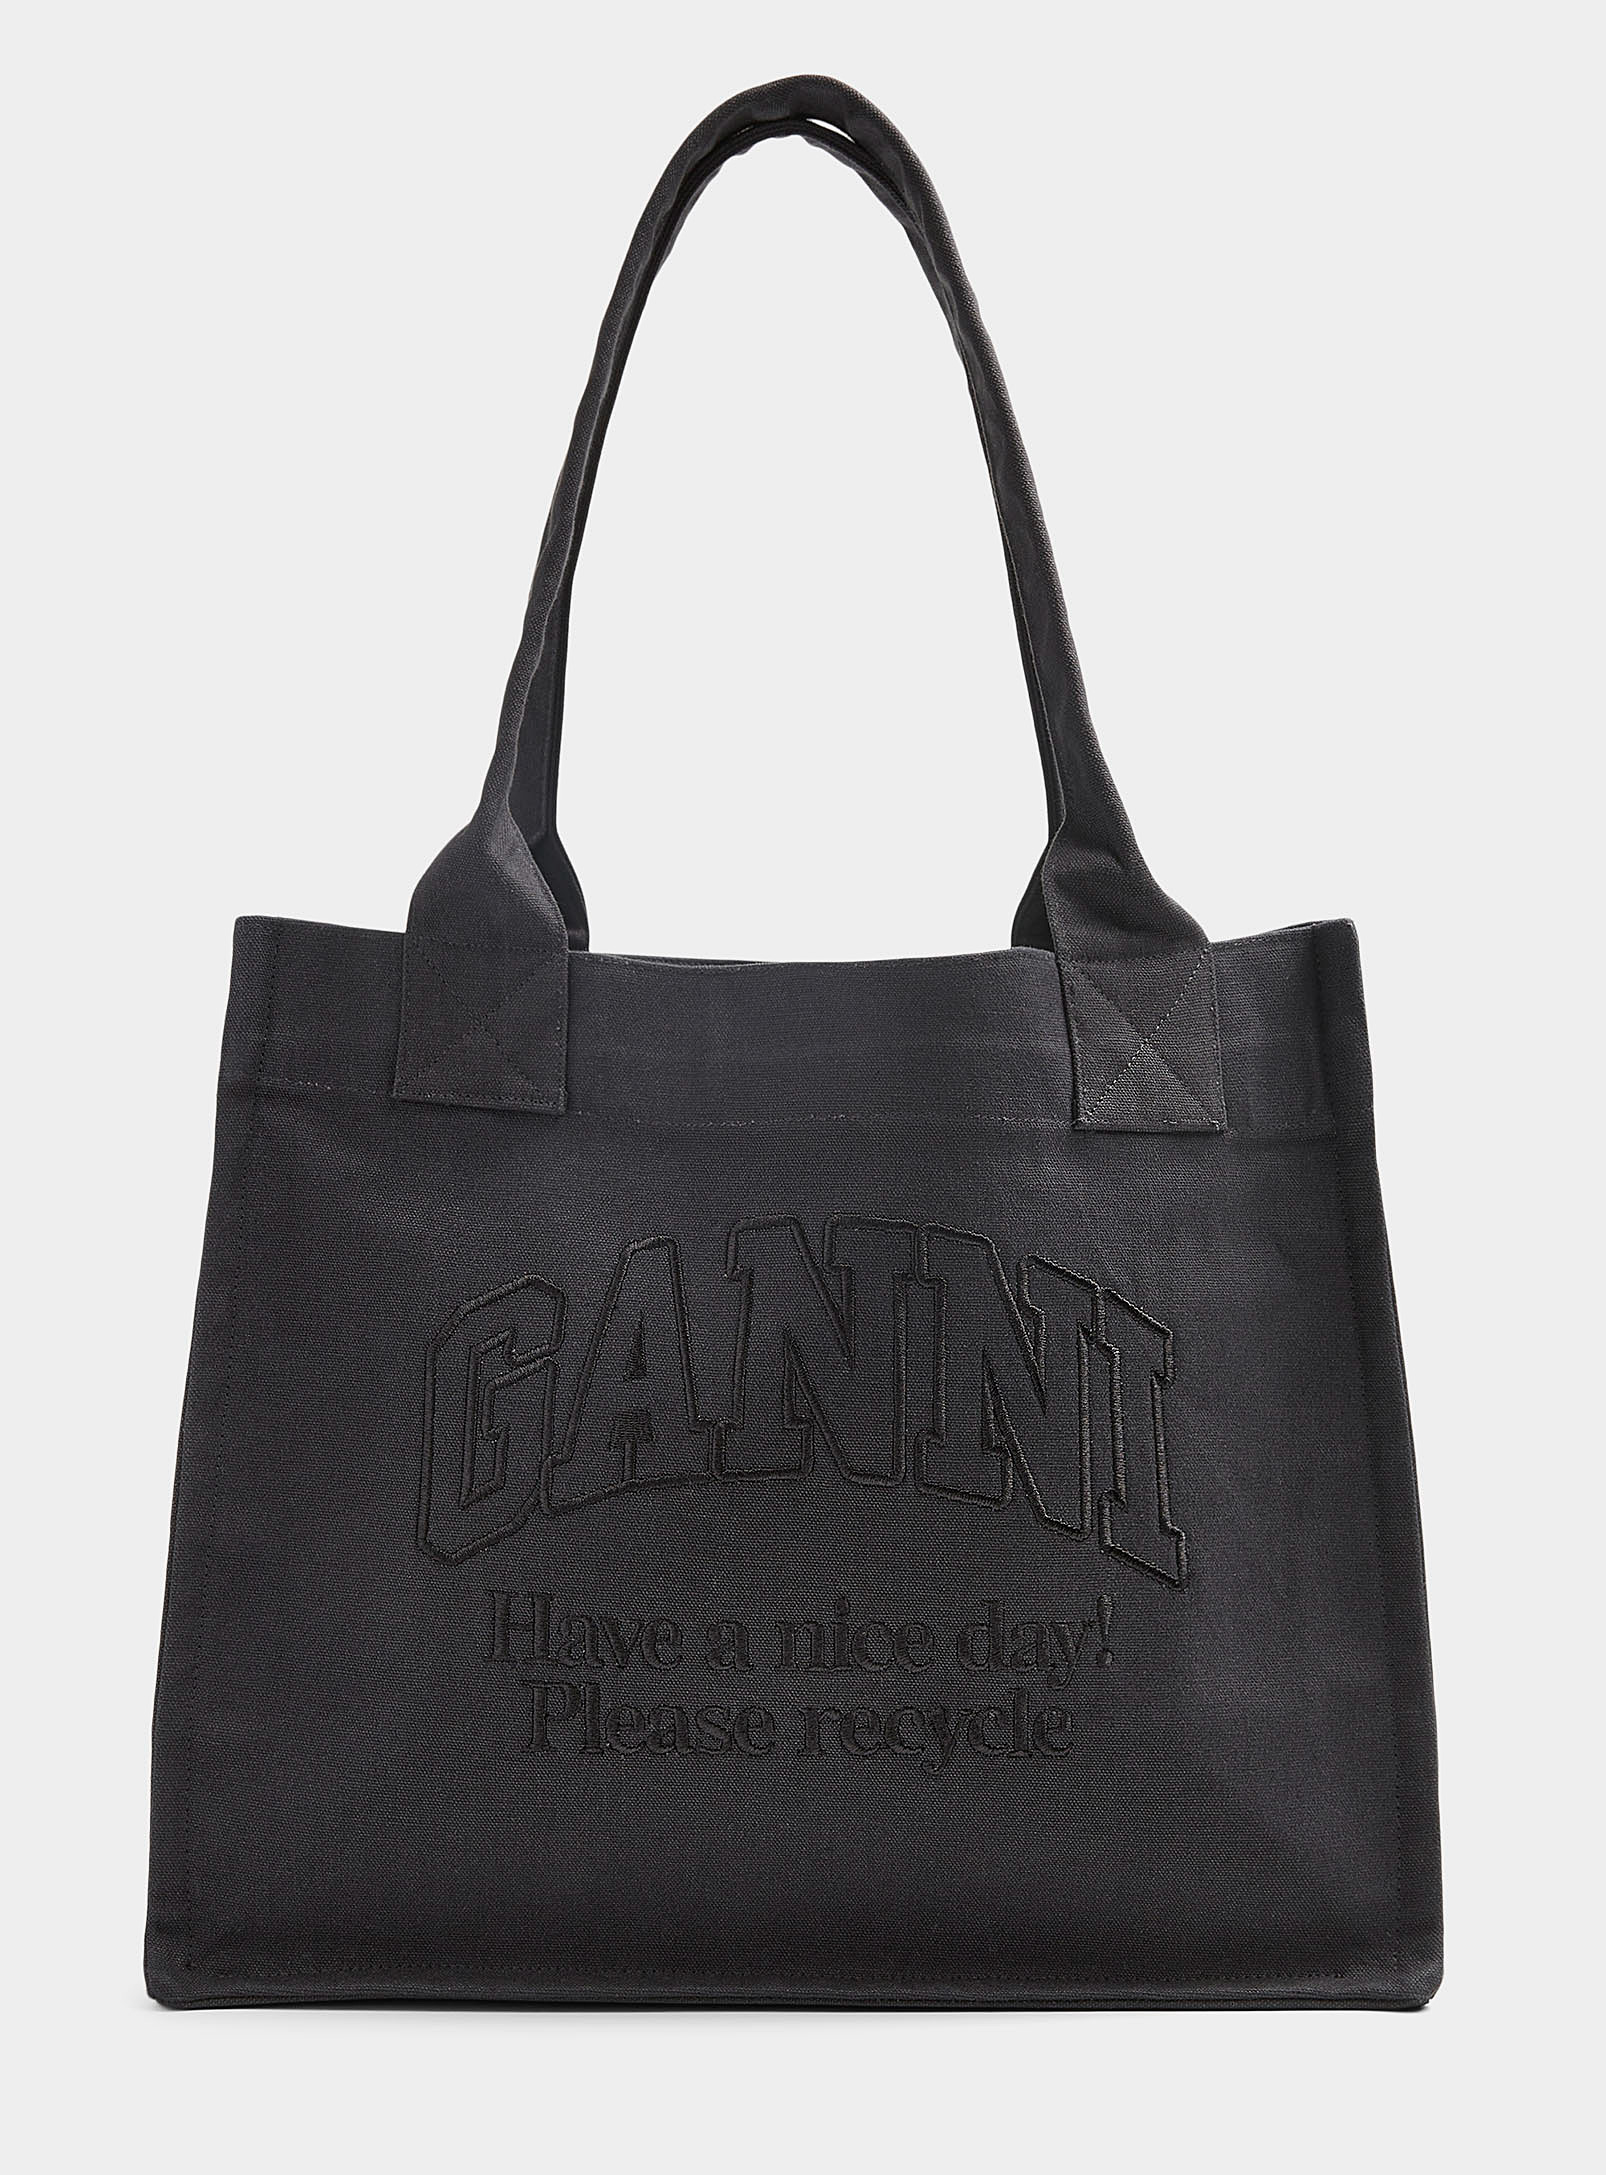 Ganni Please Recycle Black Tote In Oxford